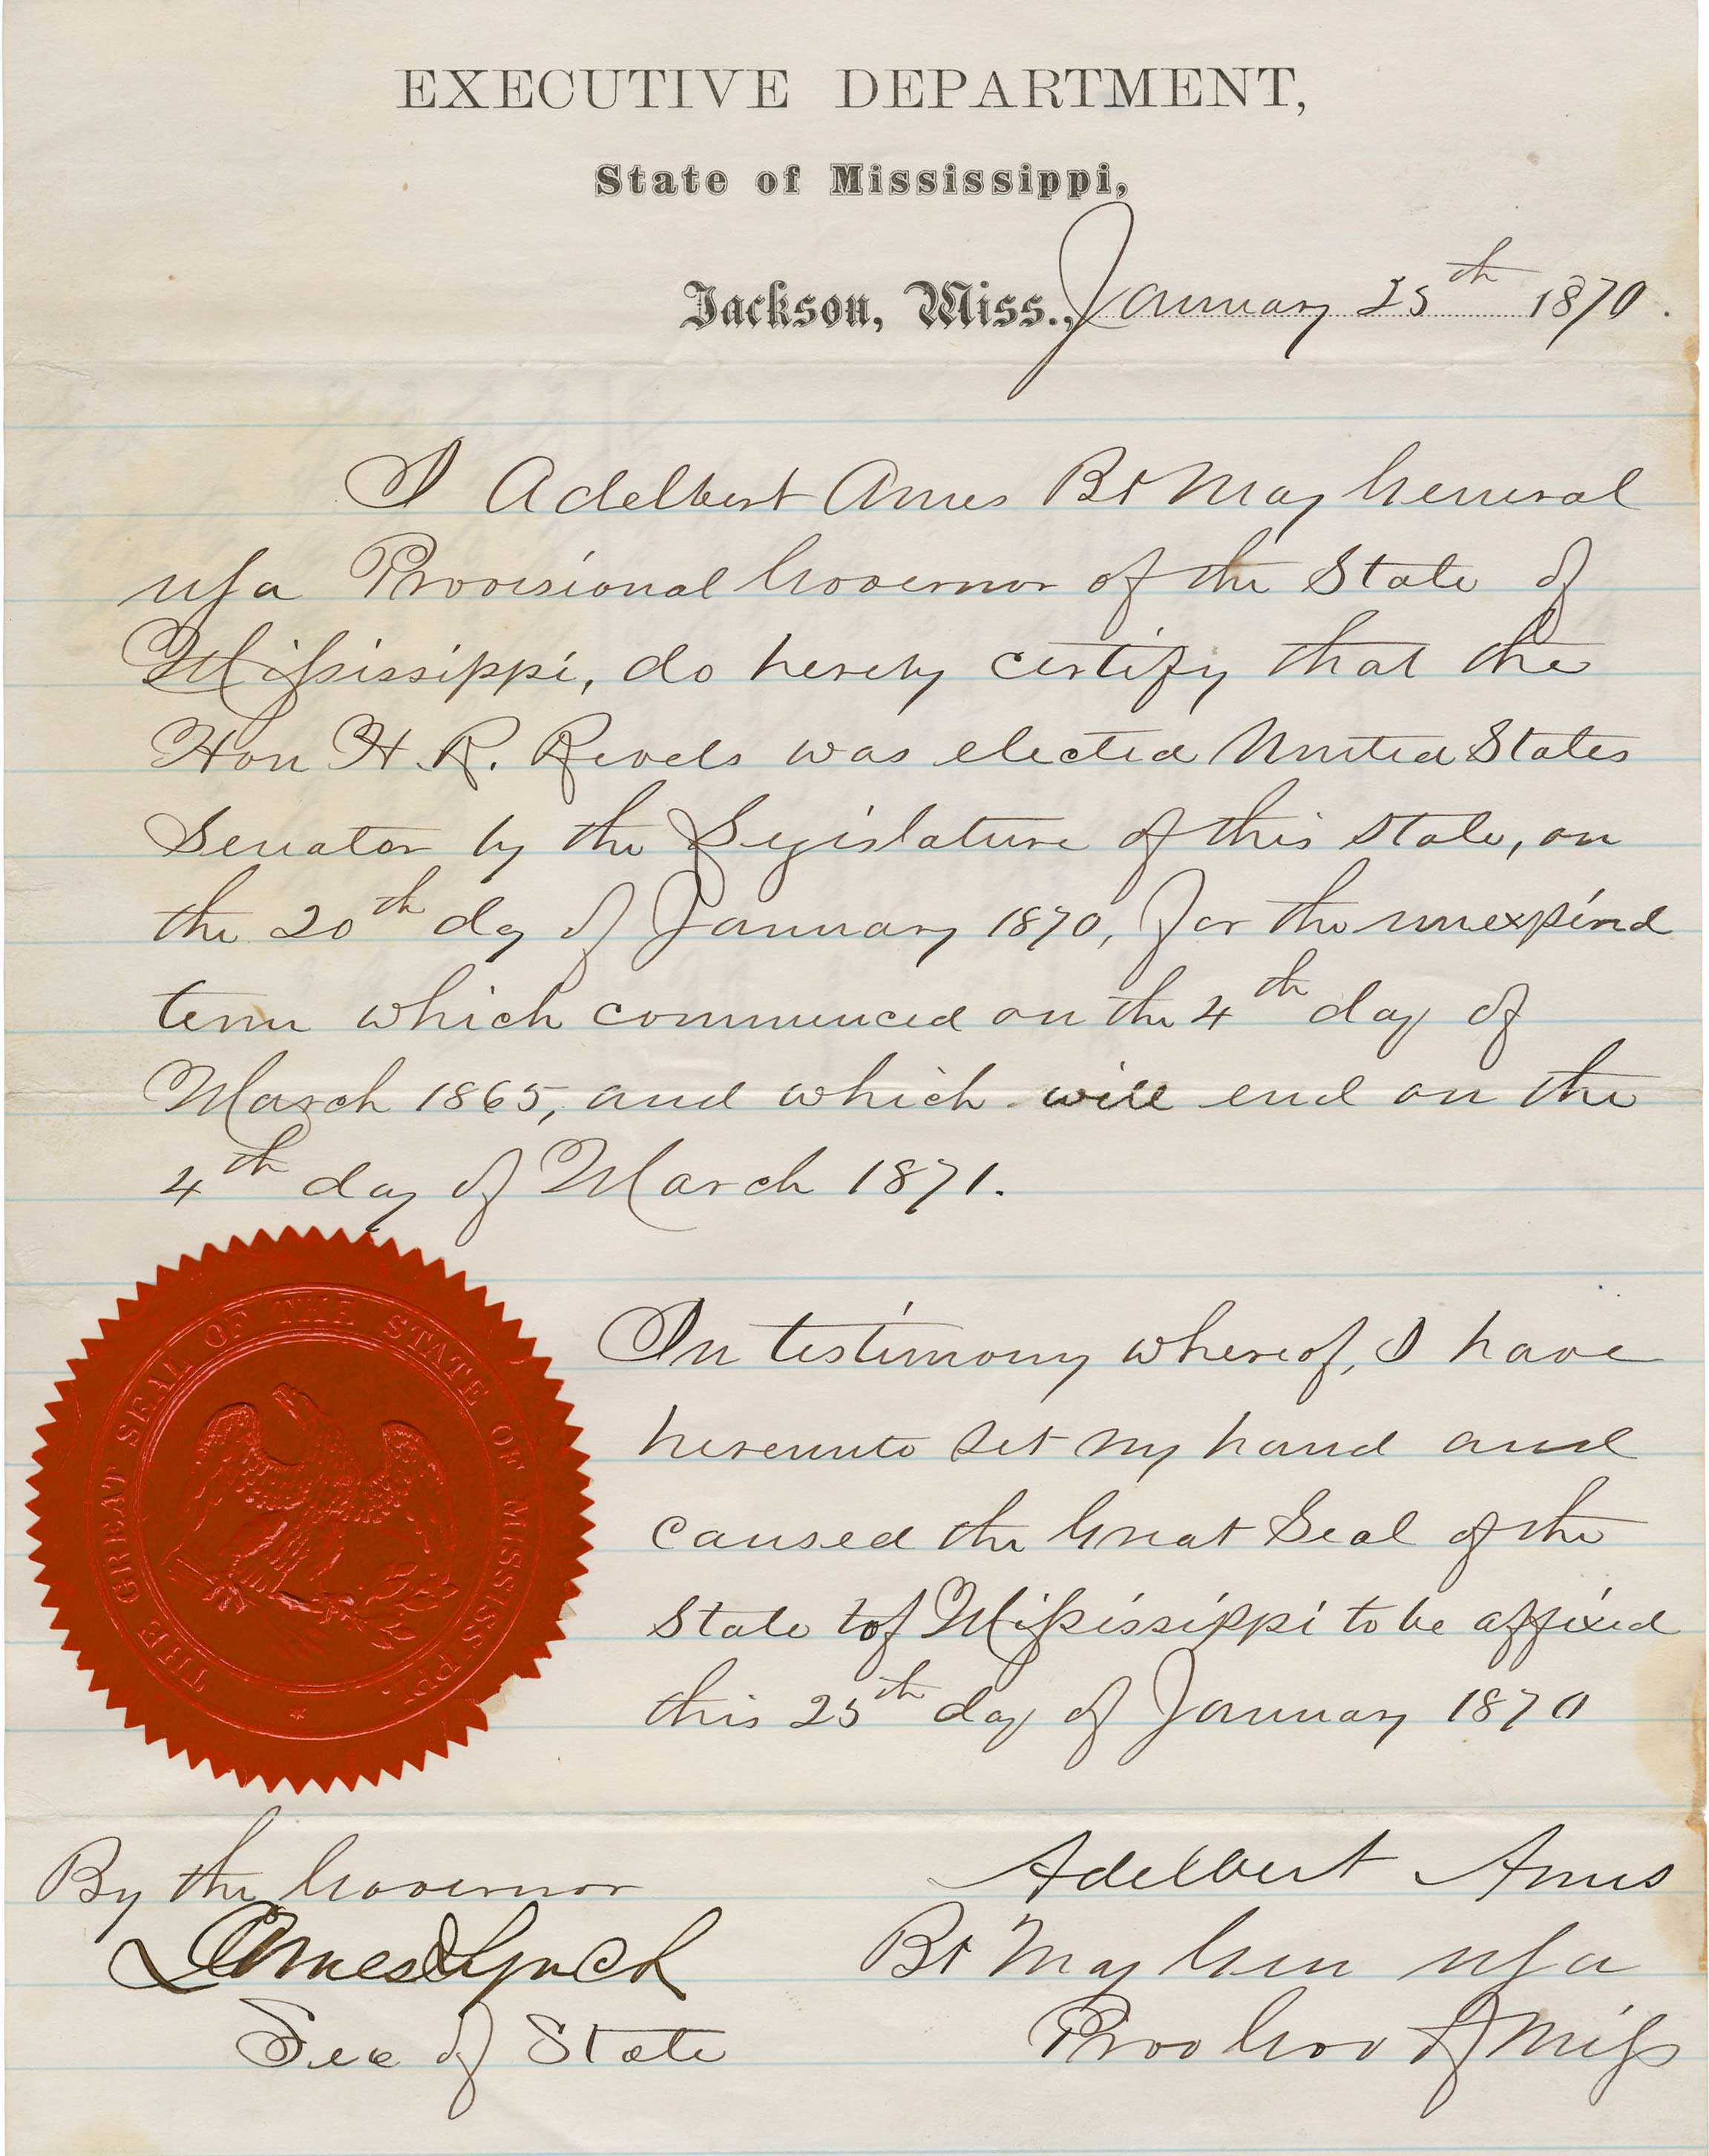 An executive department order from the State of Mississippi. The handwritten order has a large red seal in the left hand corner.